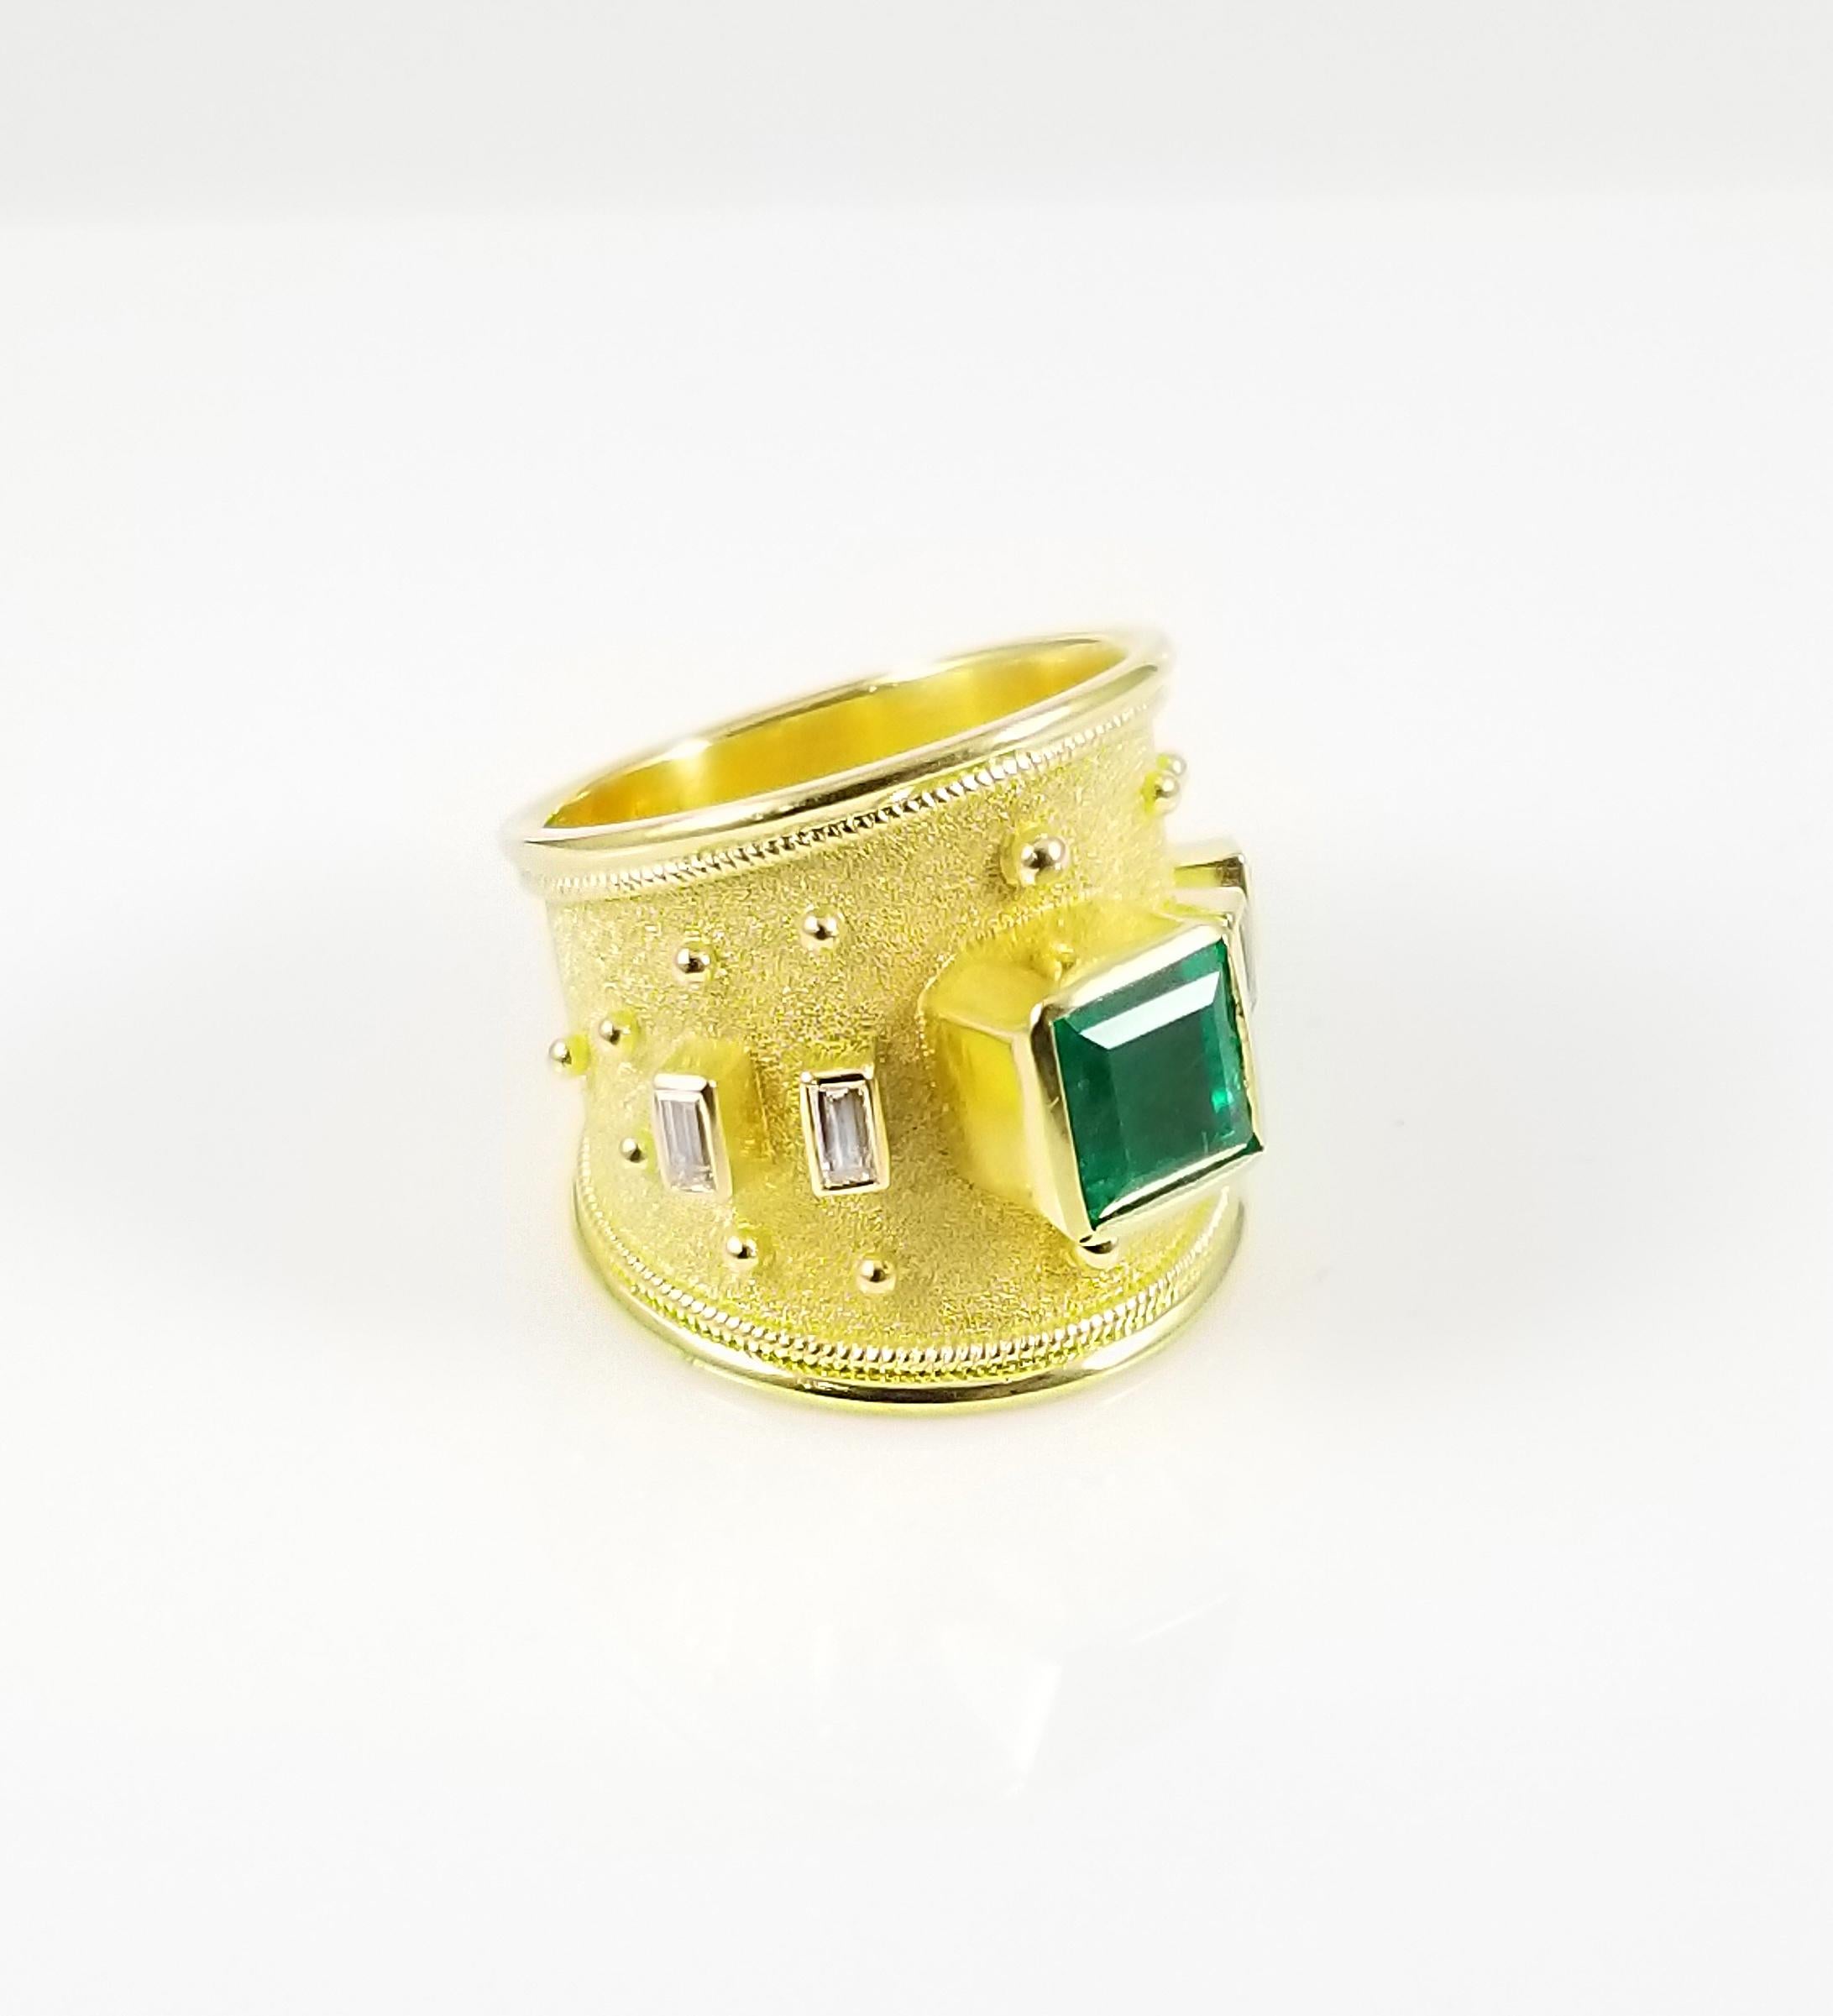 S.Georgios designer 18 Karat Solid Yellow Gold Ring all handmade with the Byzantine granulation workmanship and a unique velvet background all done under a microscope. The stunning ring has a center emerald cut Natural Emerald total weight of 2,38